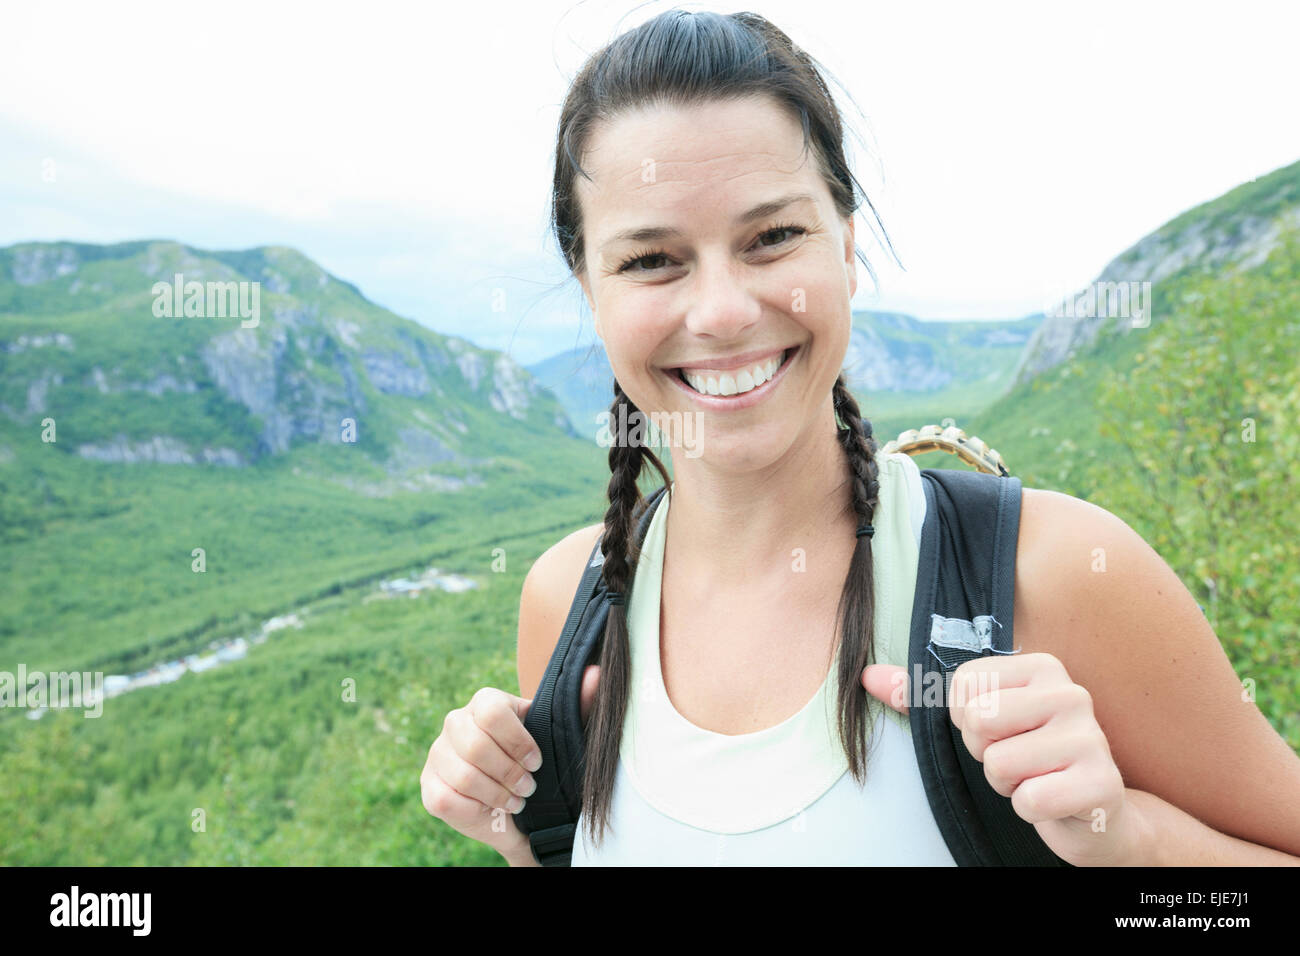 Female hiker with backpack Stock Photo